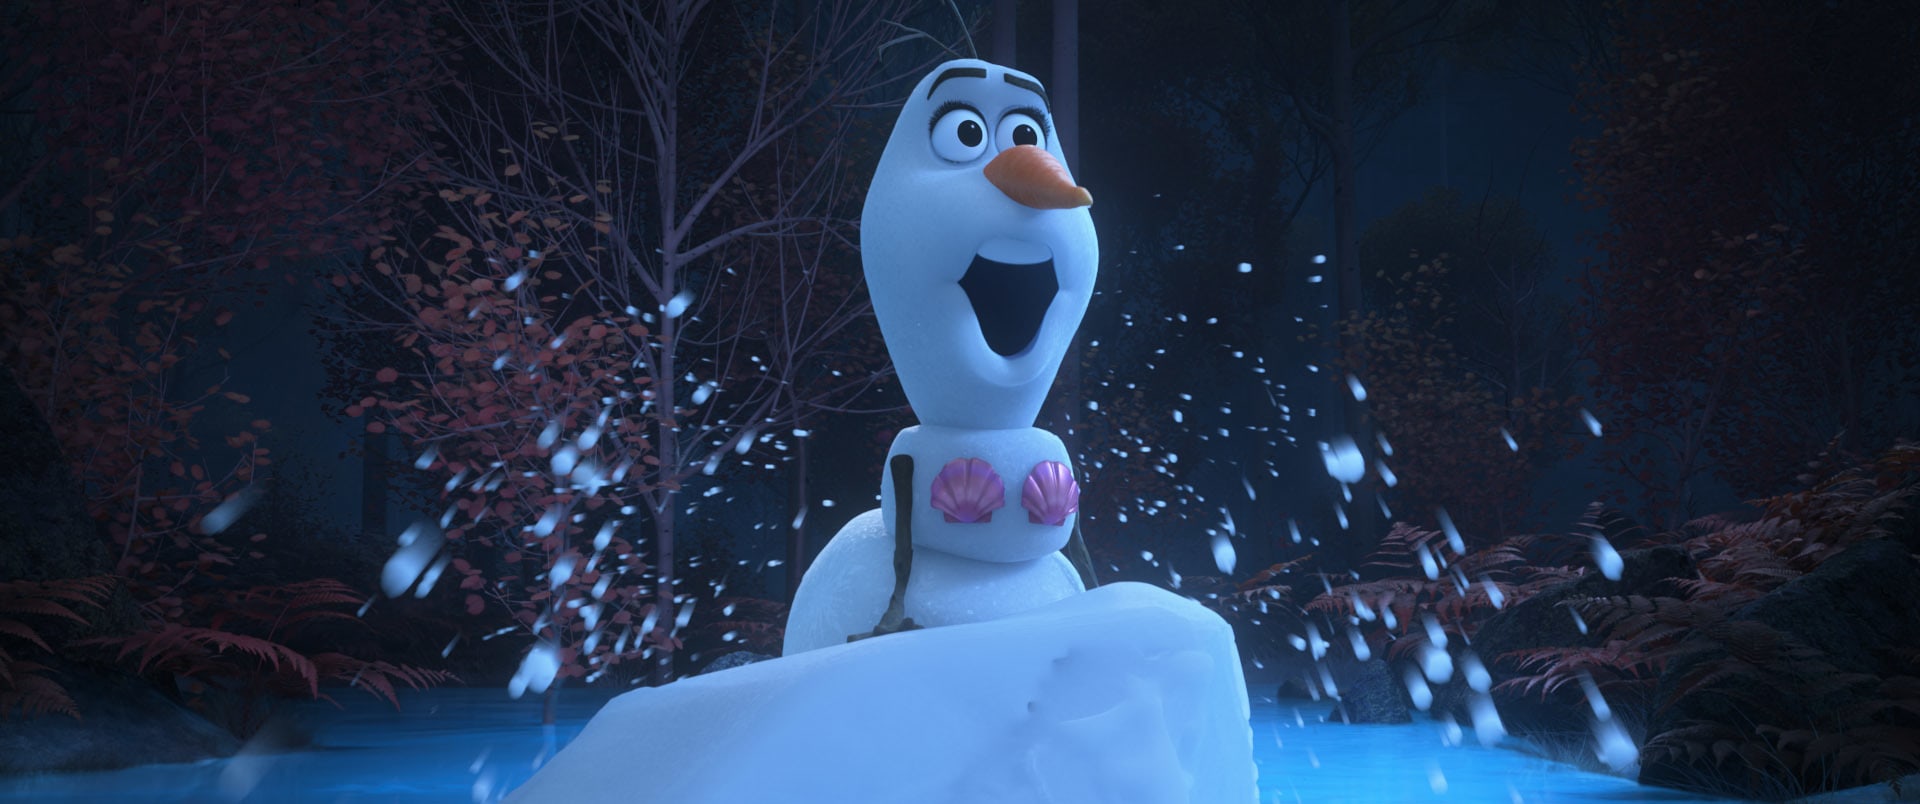 Olaf Presents Review